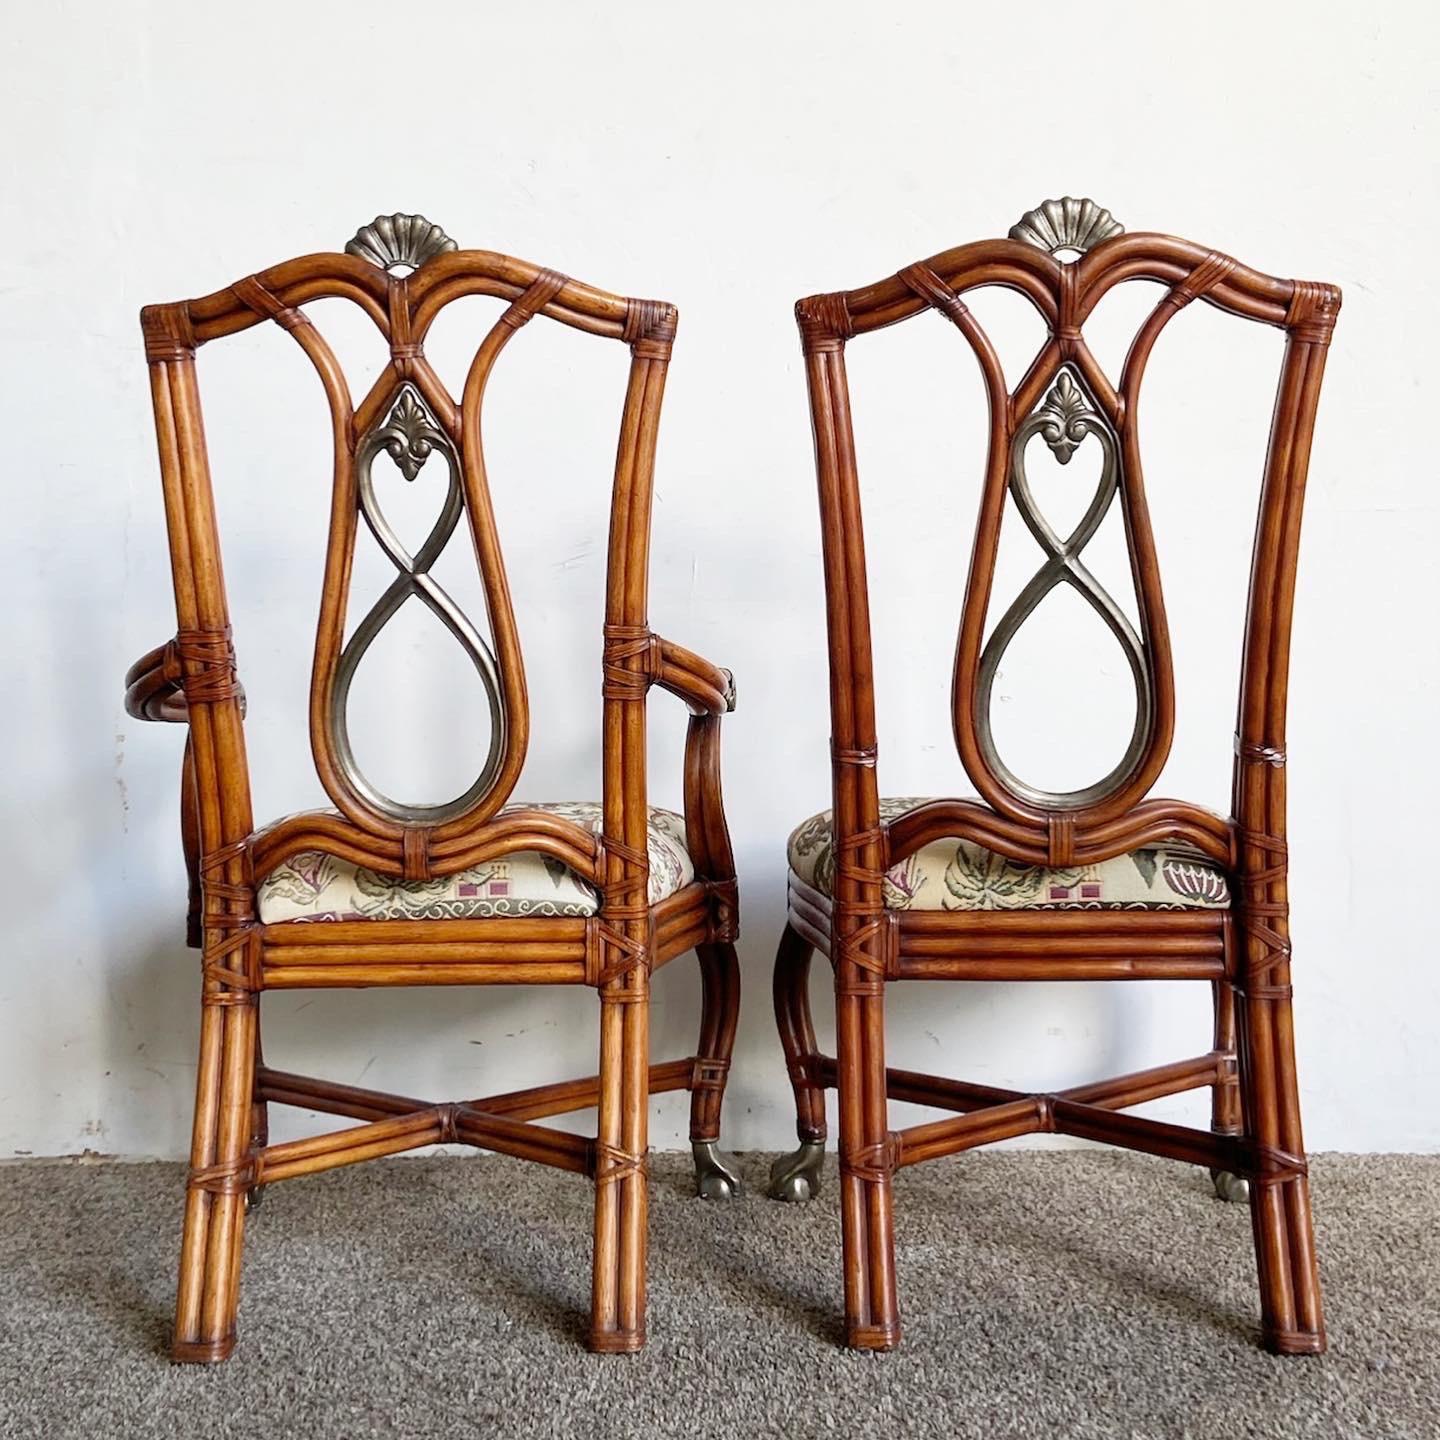 Late 20th Century Boho Chic Ornate Bamboo Rattan Ball in Claw Dining Chairs - Set of 4 For Sale